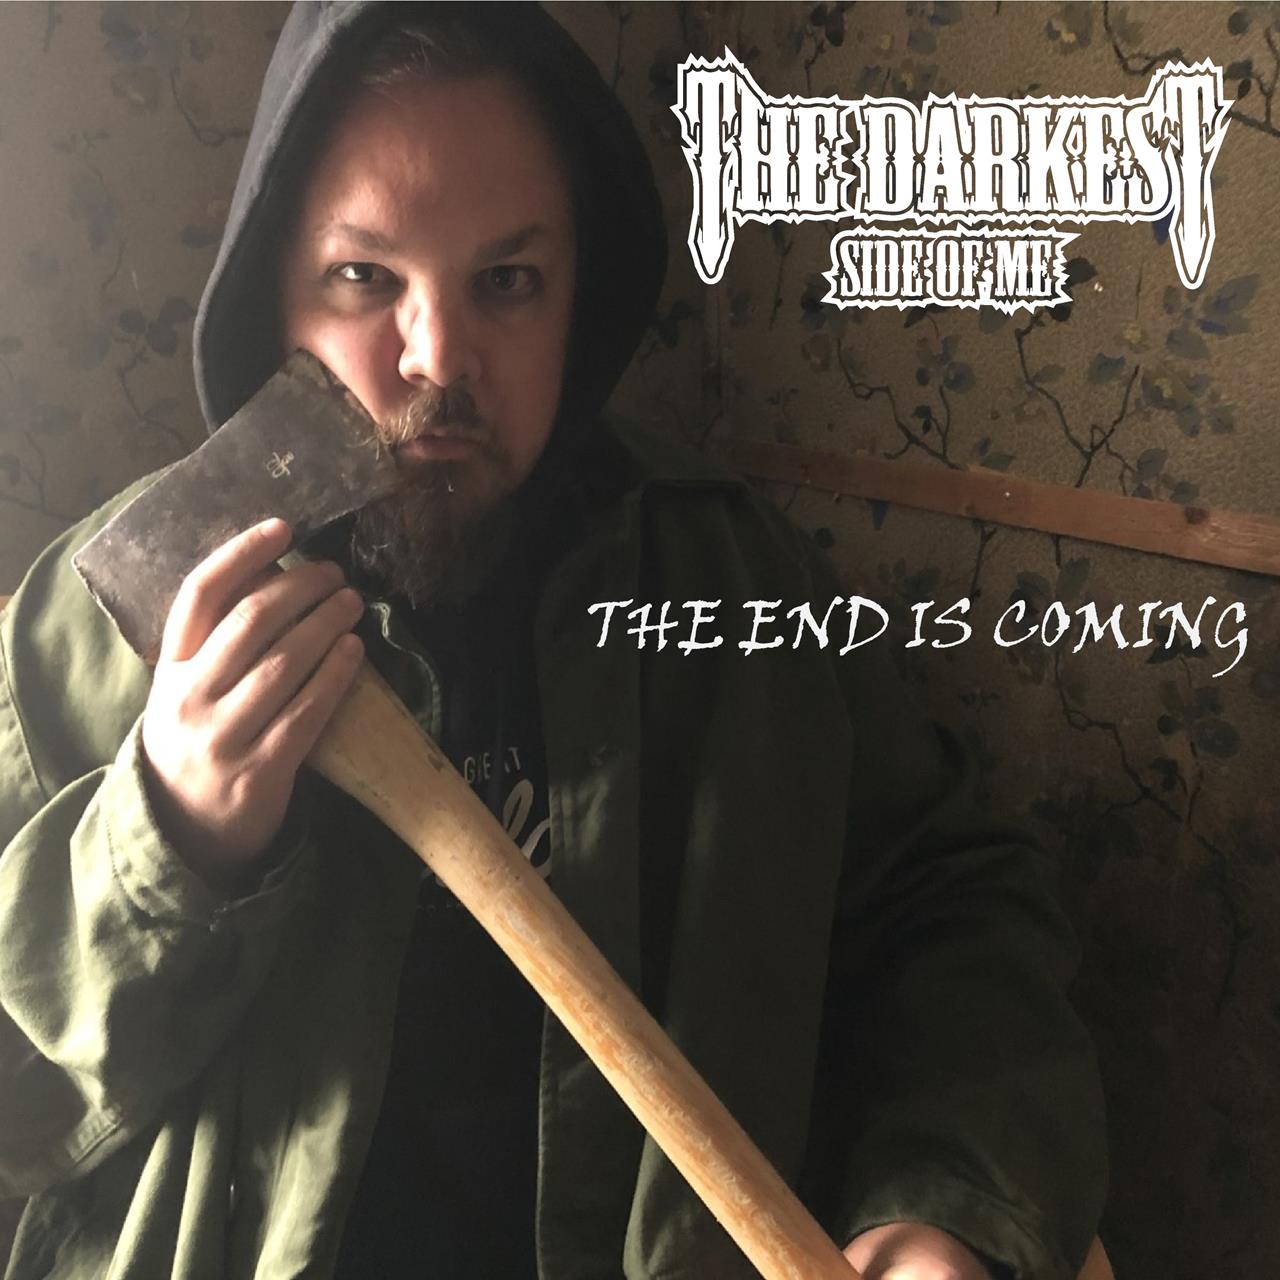 The End Is Coming - cover art